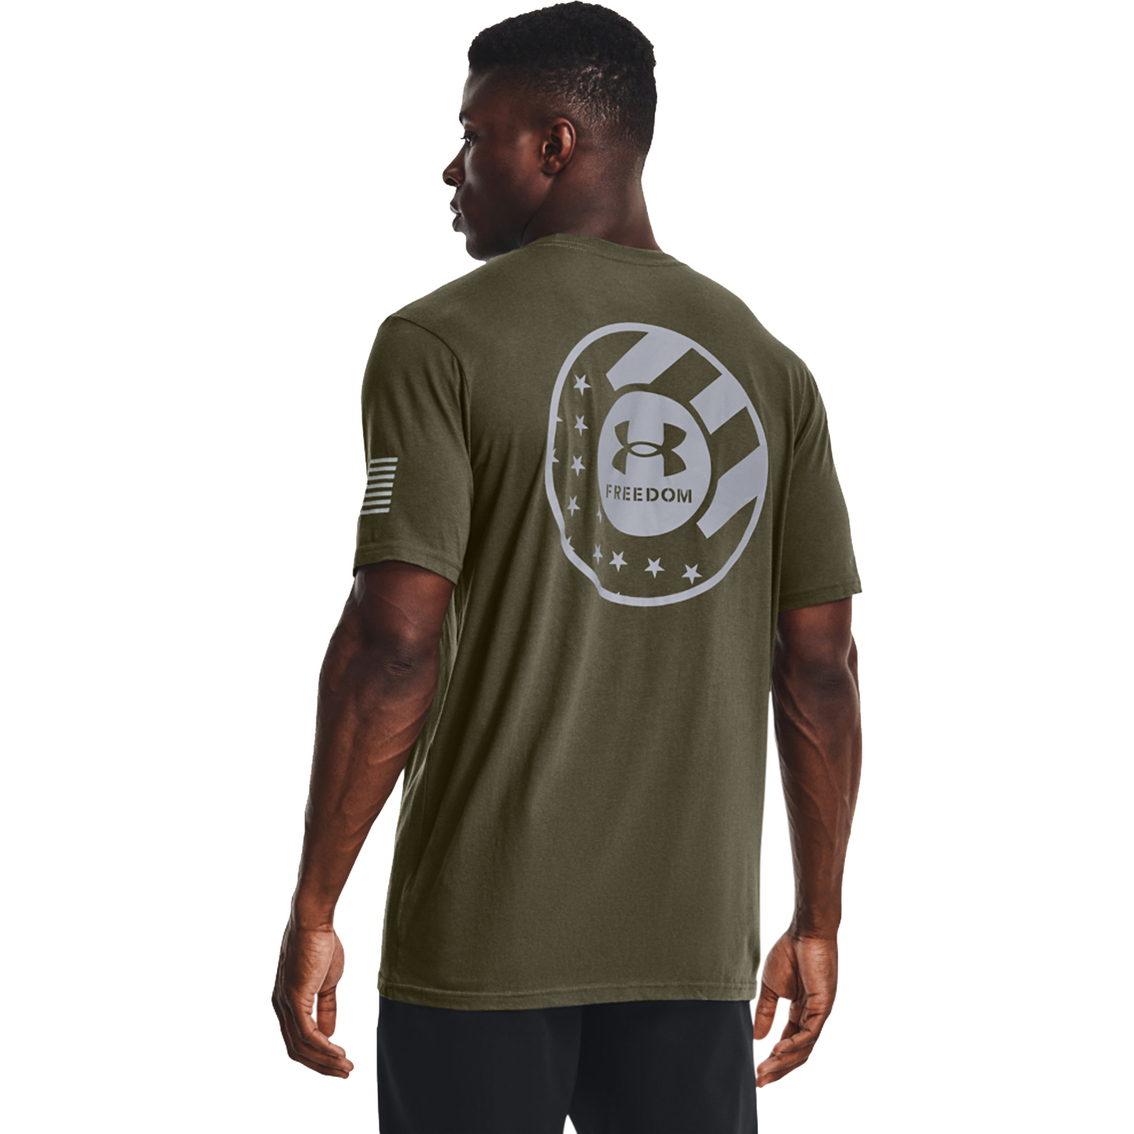 Under Armour New Freedom Flag Bold Tee | Shirts | Clothing ...